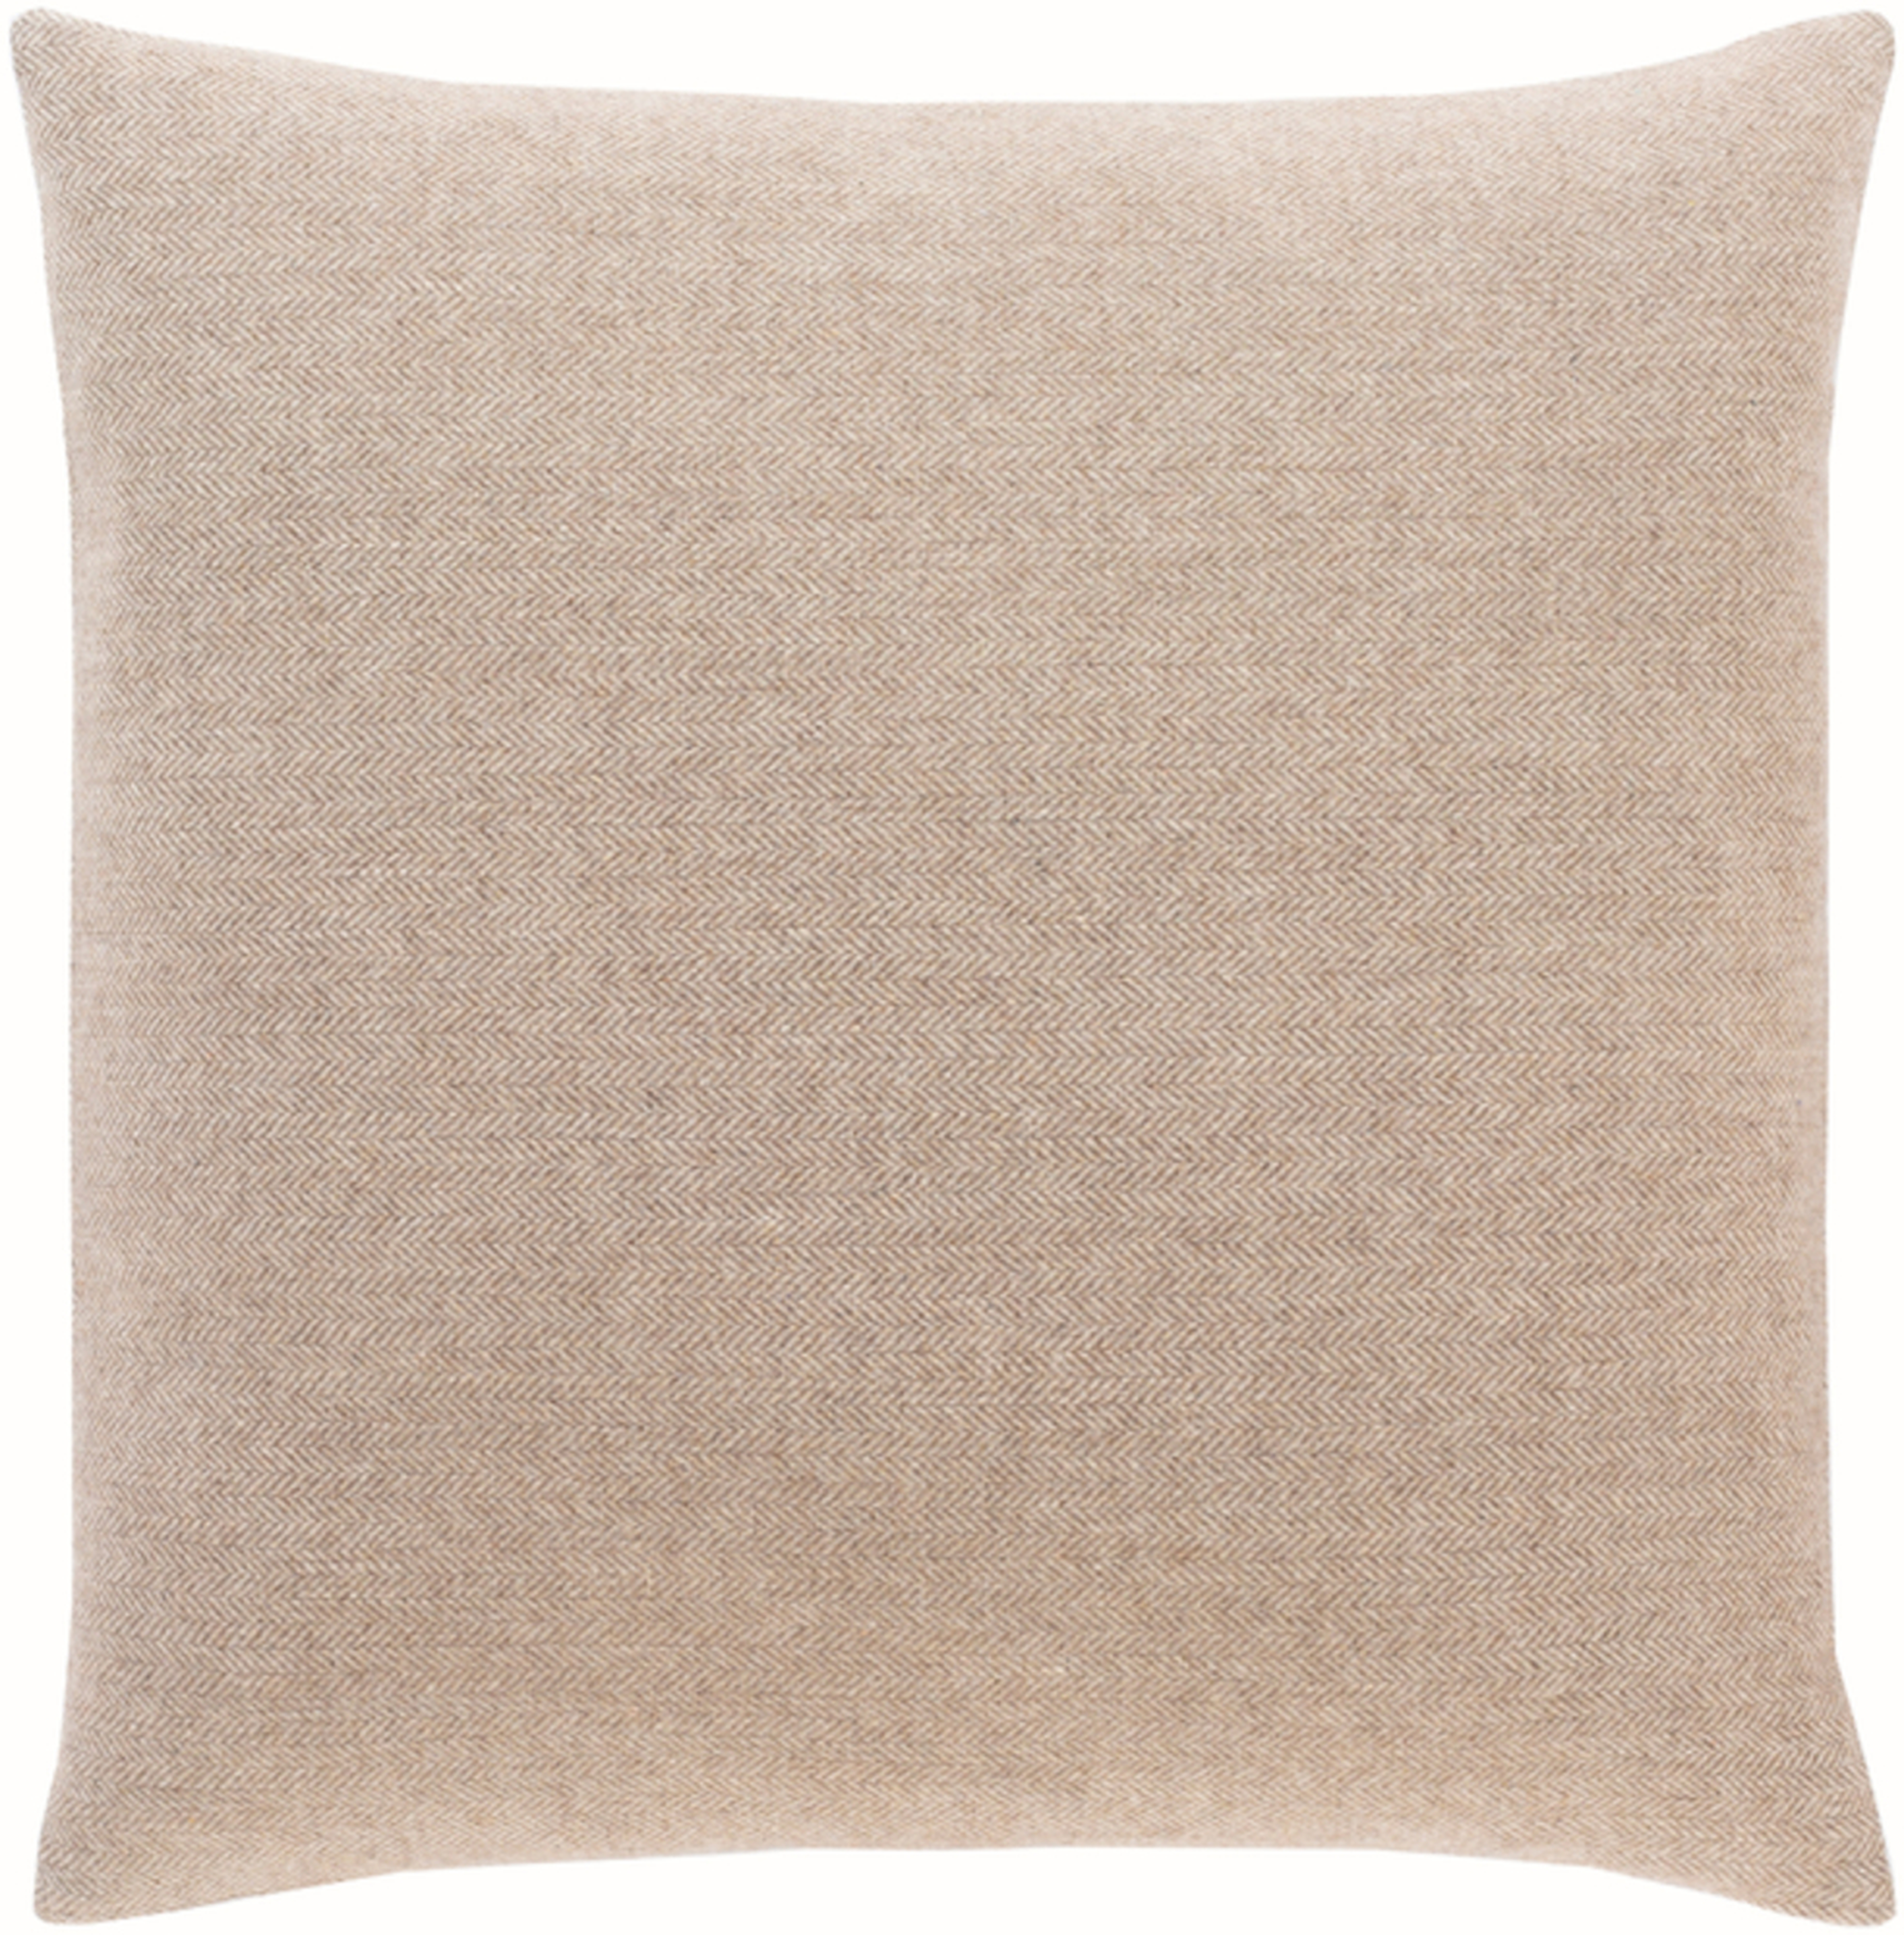 Wells Pillow Cover, 22" x 22" Taupe - Cove Goods